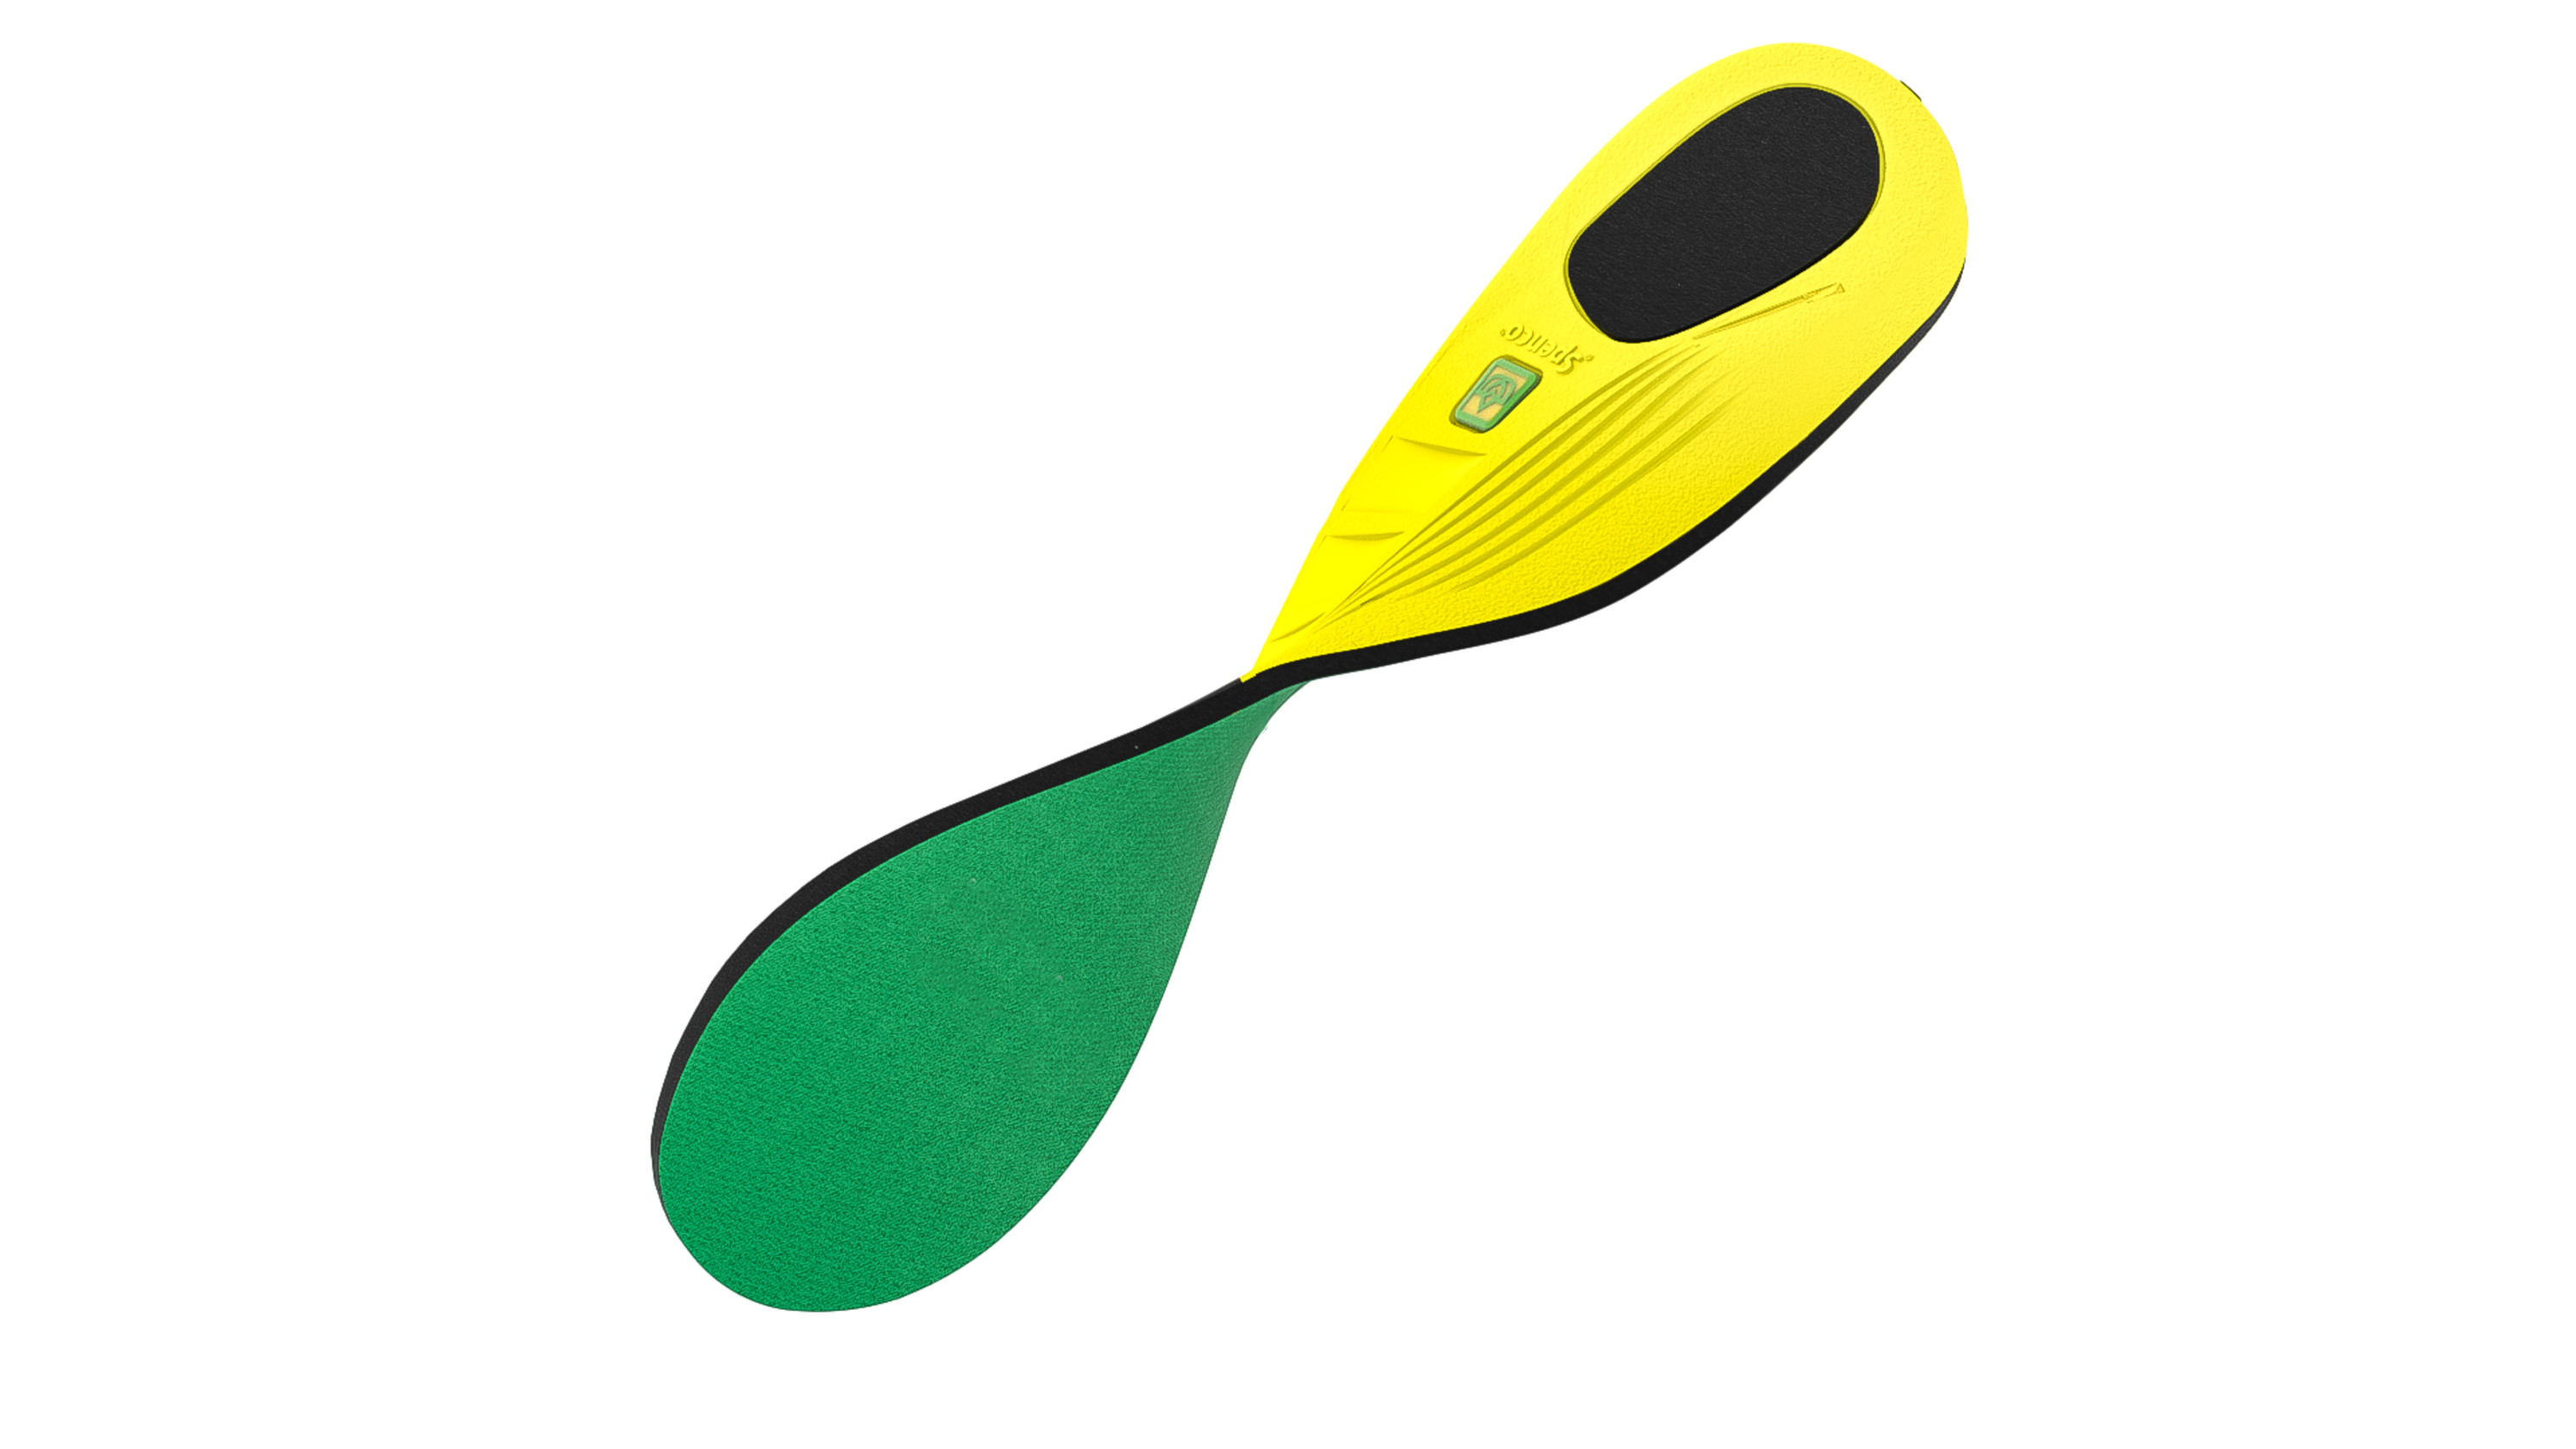 Spenco Polysorb Cross Trainer Insole - image 3 of 5